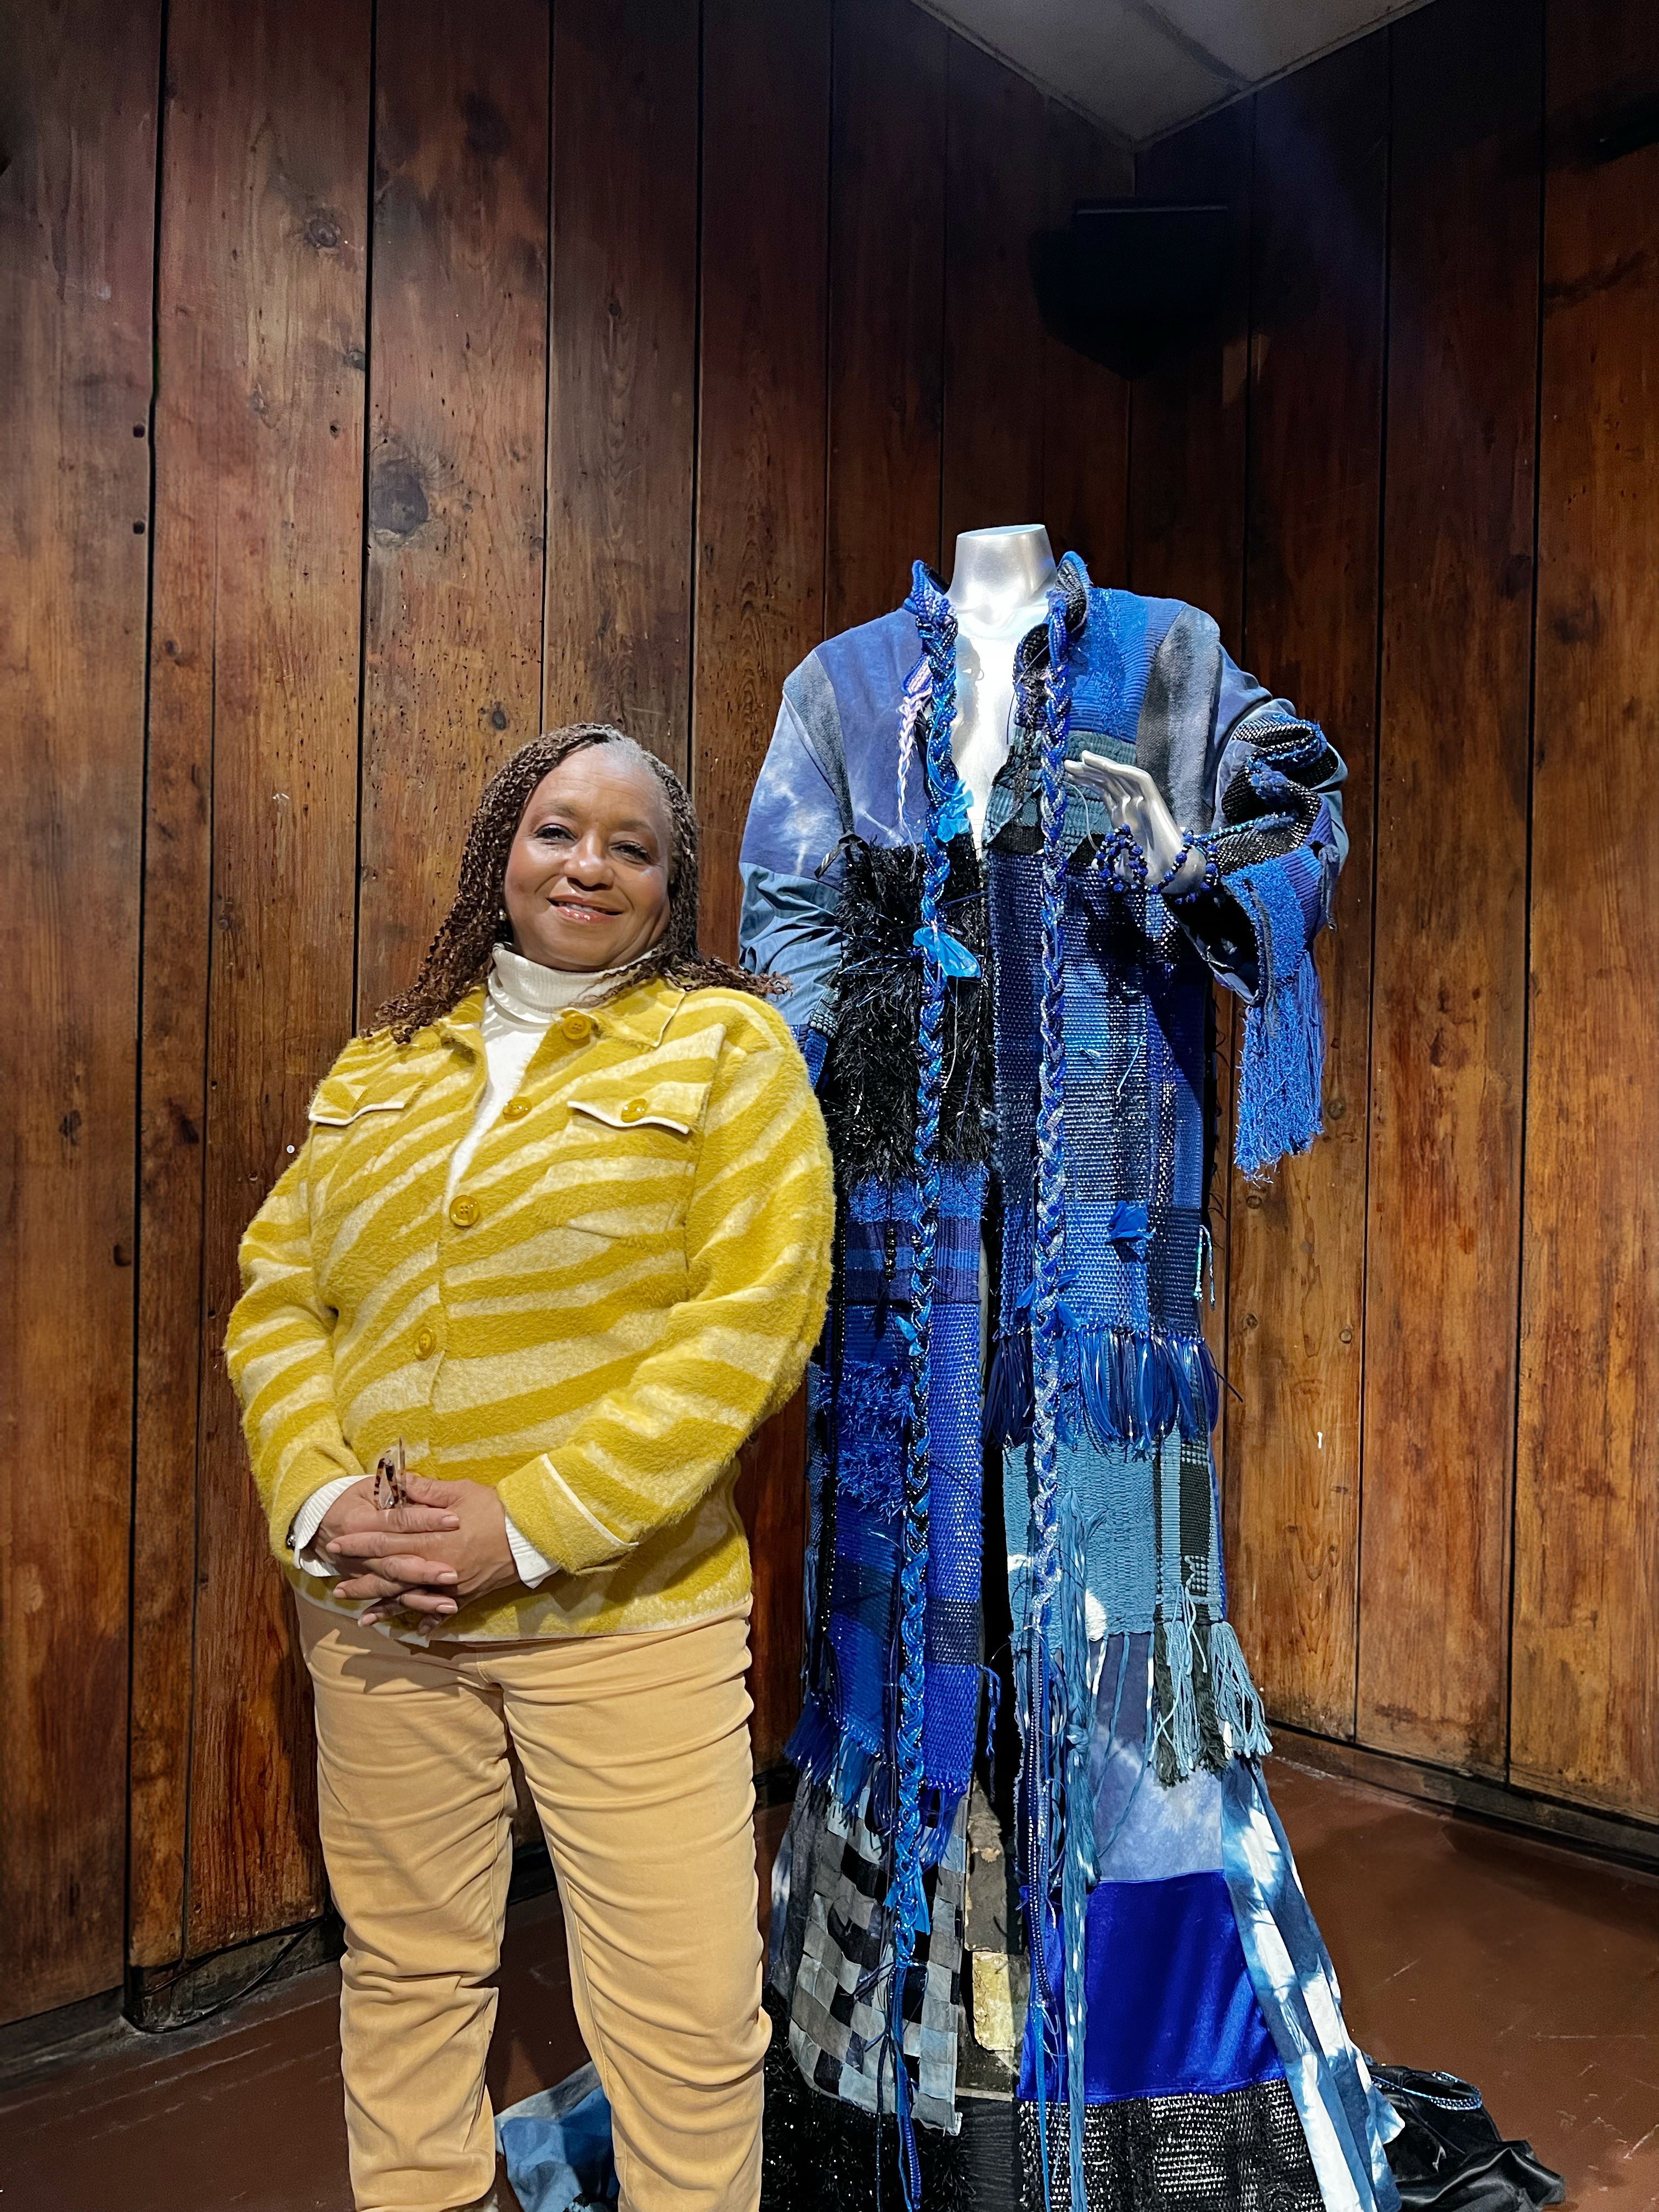 Jacqueline Williams stands in front of a mannequin in a blue robe